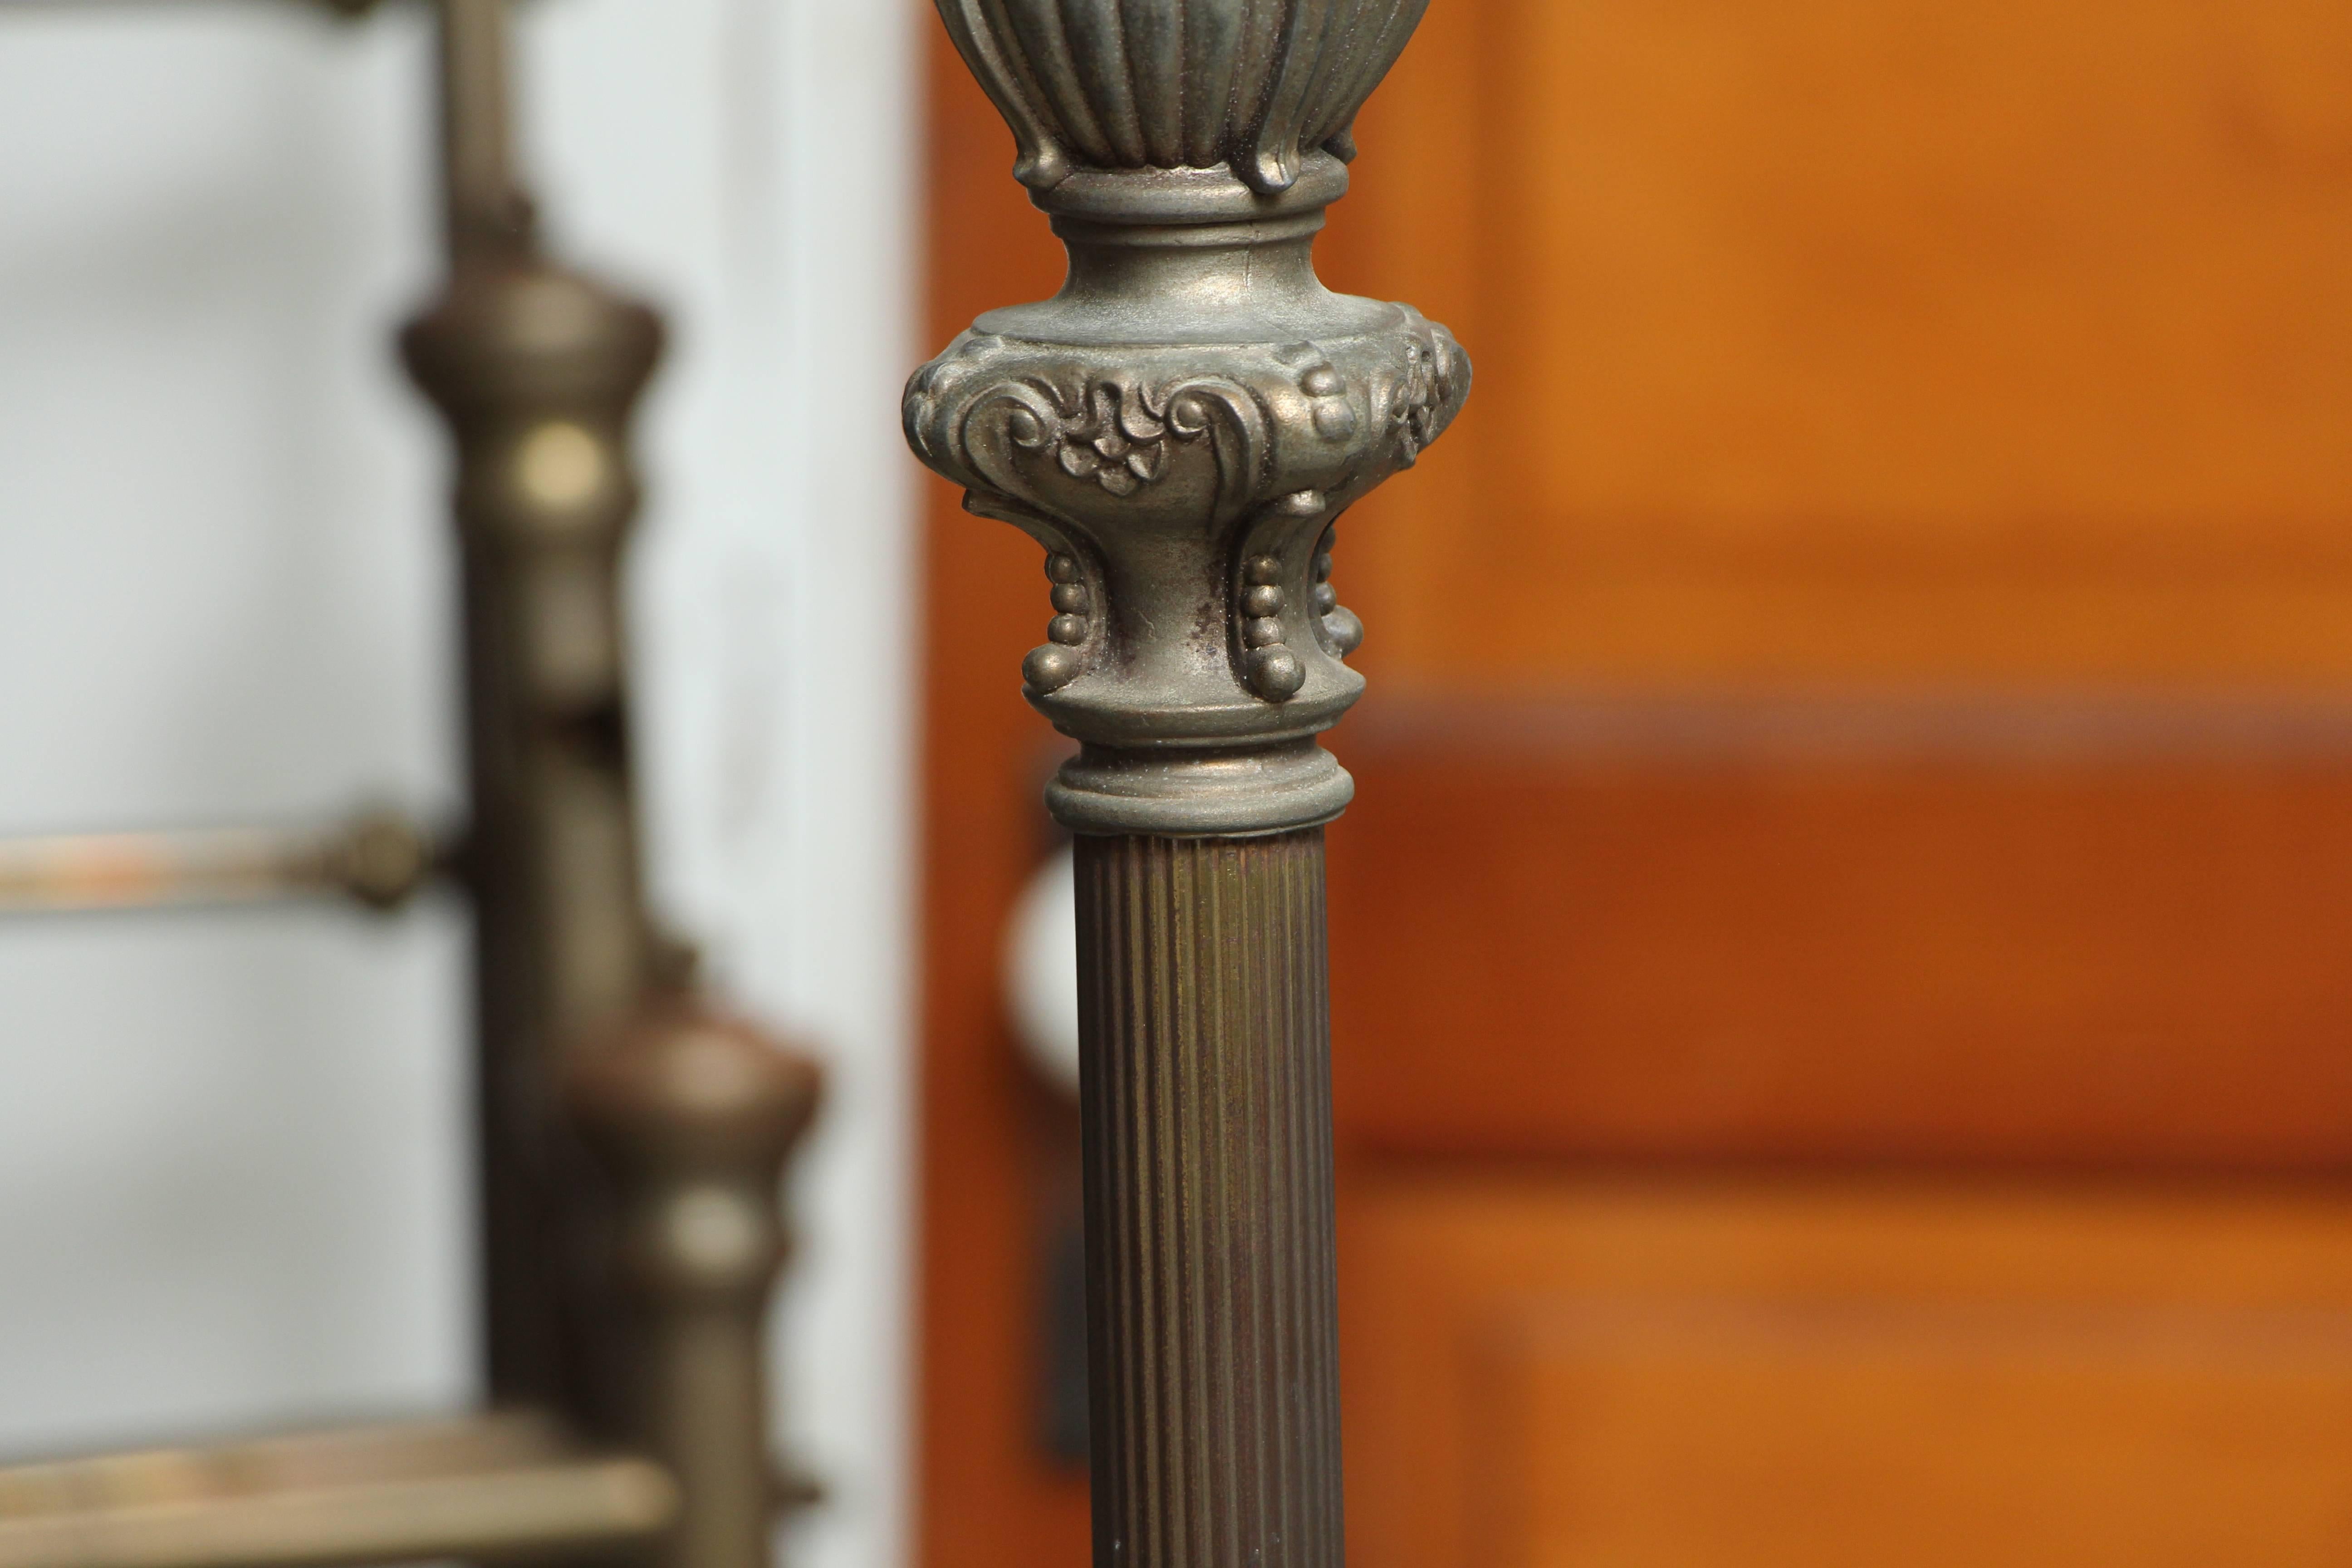 American 1930s Art Nouveau Torchiere Floor Lamp with Marble Base and Fluted Center Column